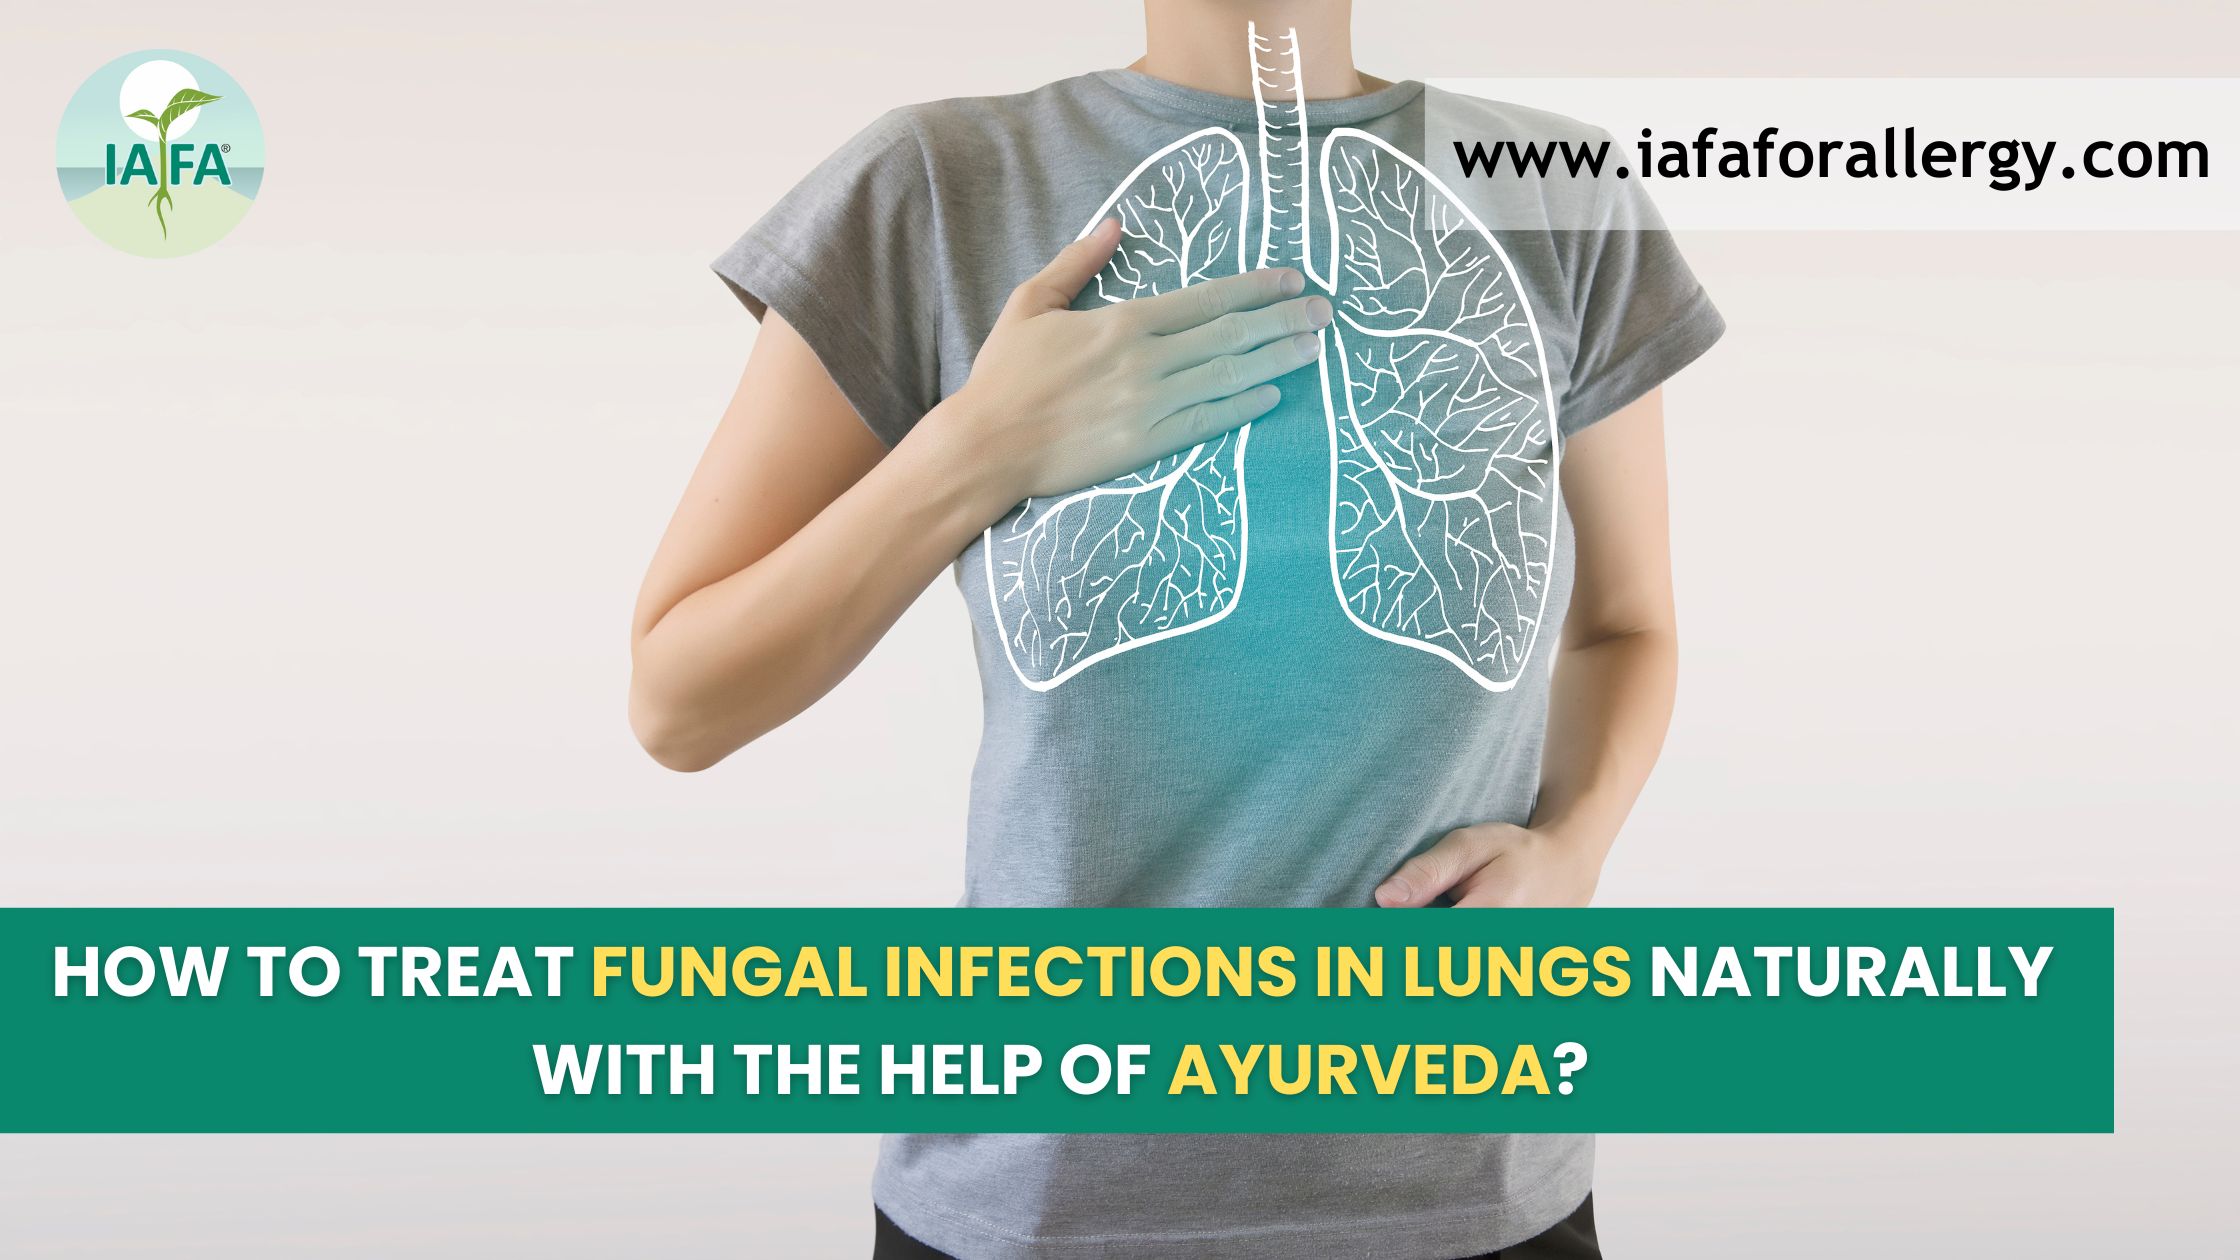 How to Treat Fungal Infections in Lungs Naturally with the Help of Ayurveda?